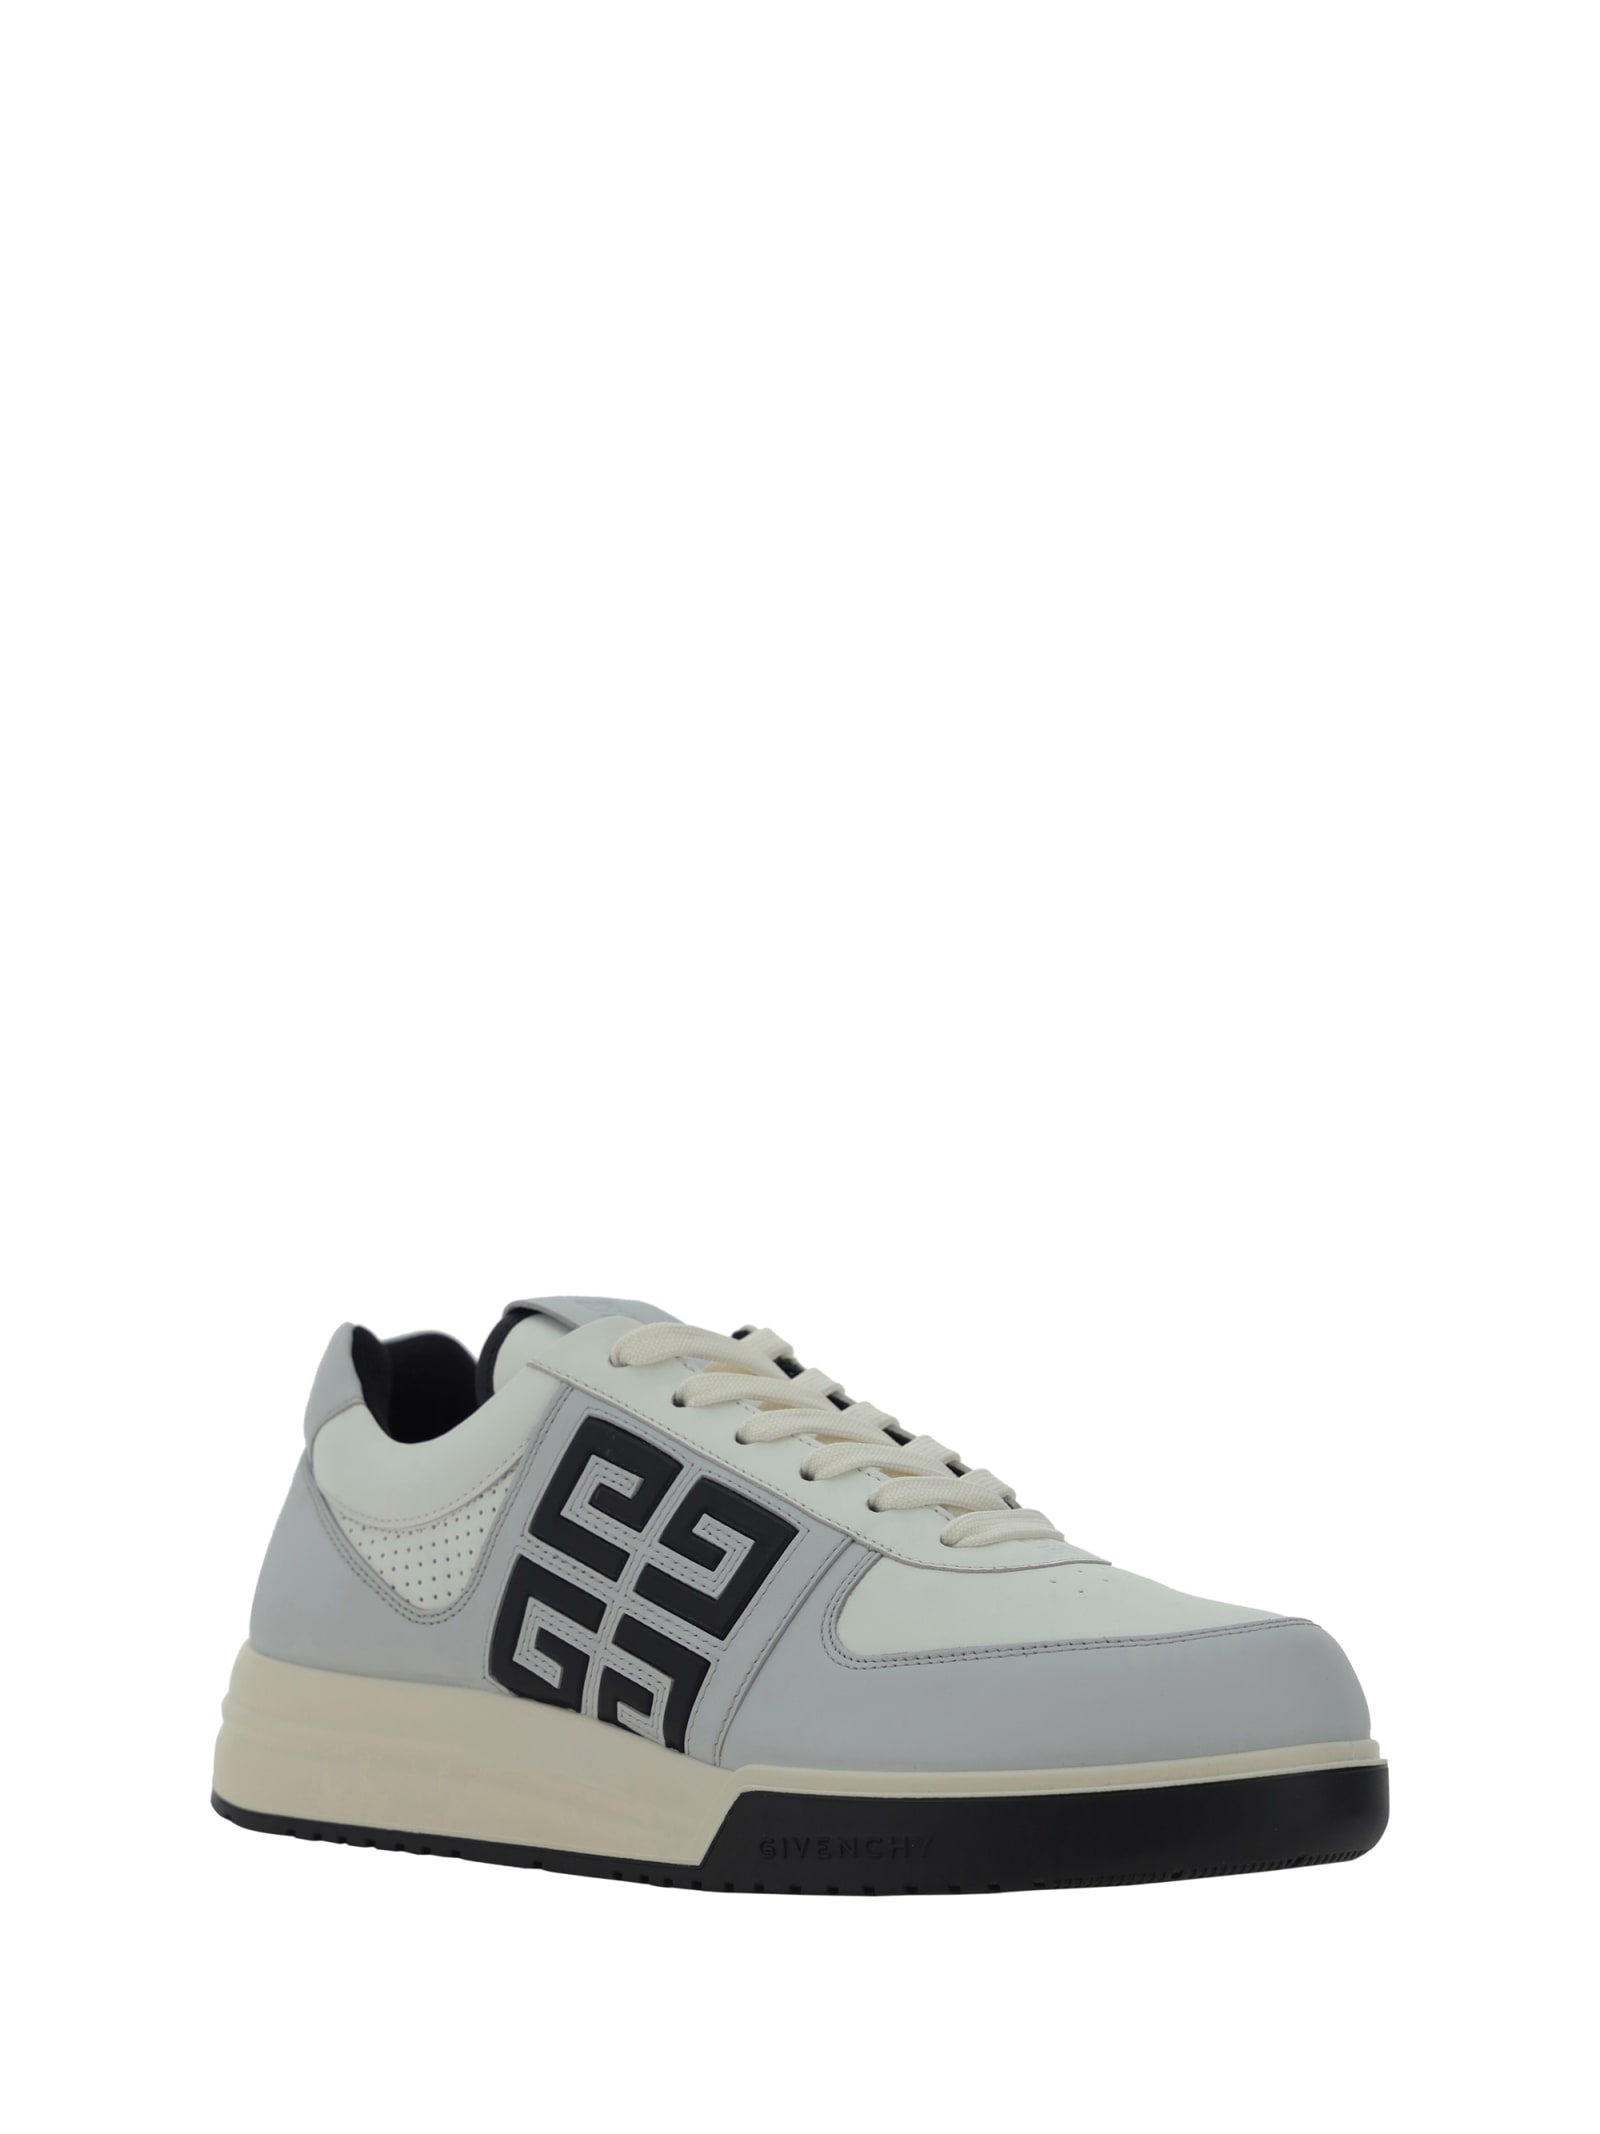 Shop Givenchy G4 Low Top Sneakers In Grey/black